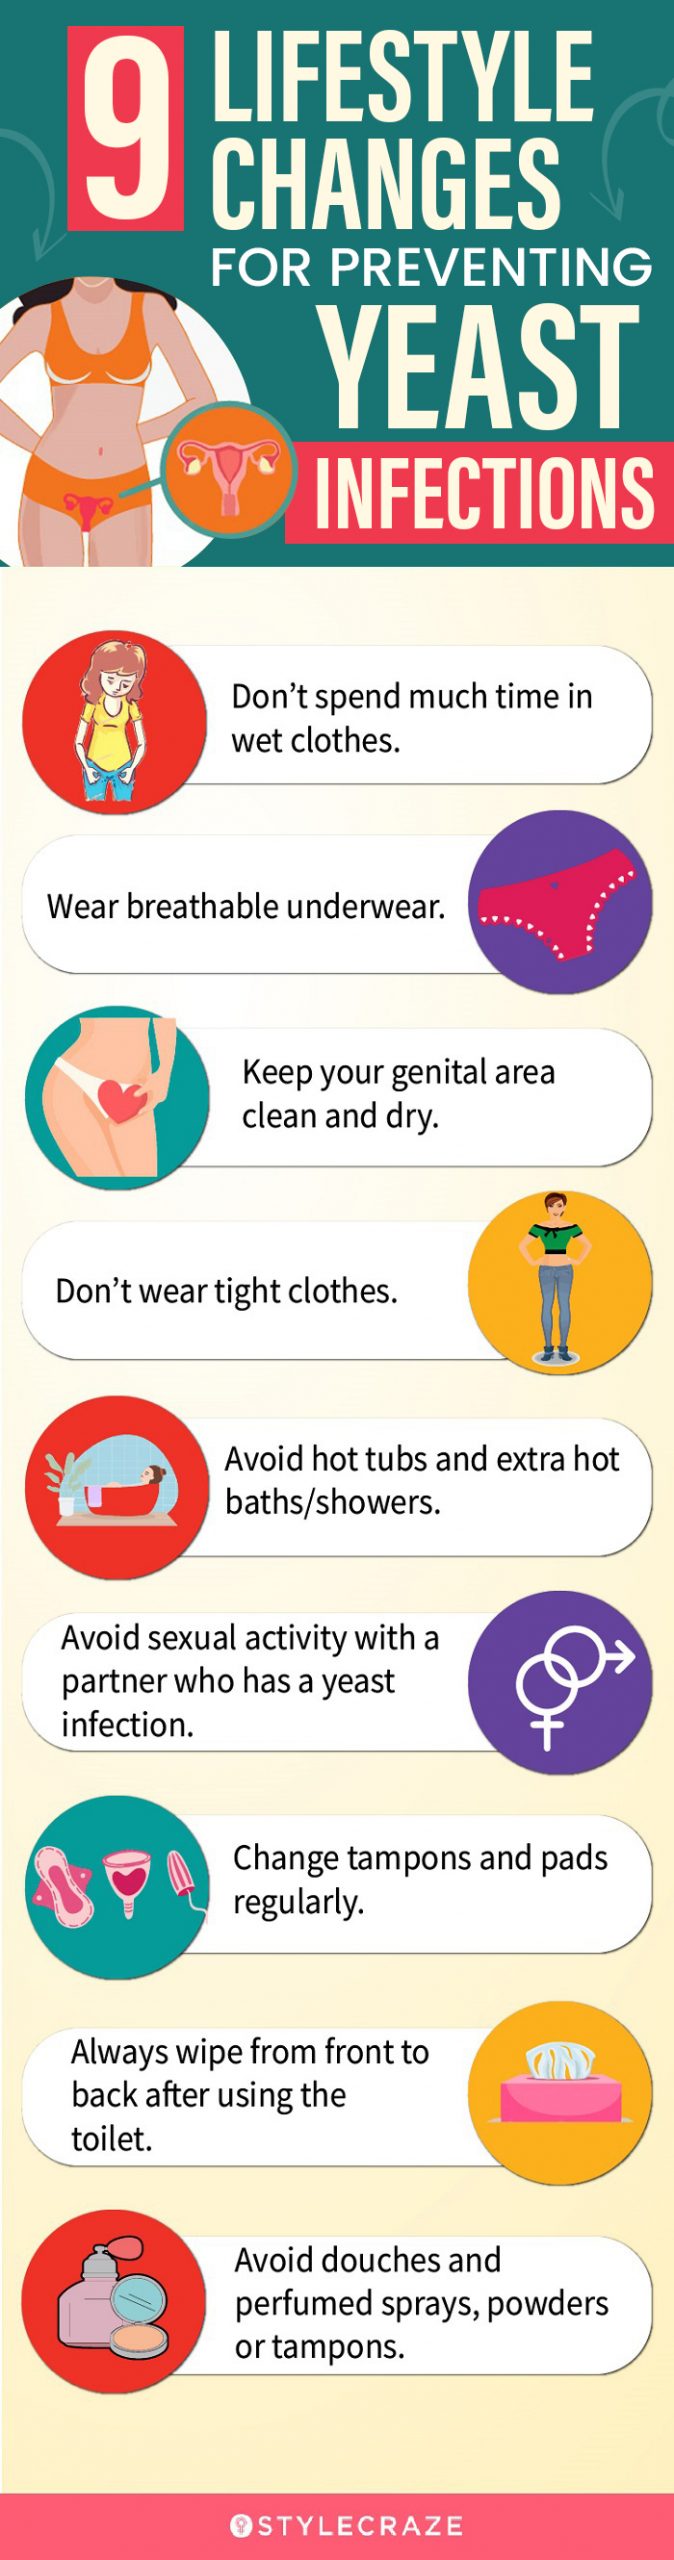 lifestyle changes for preventing yeast infections (infographic)